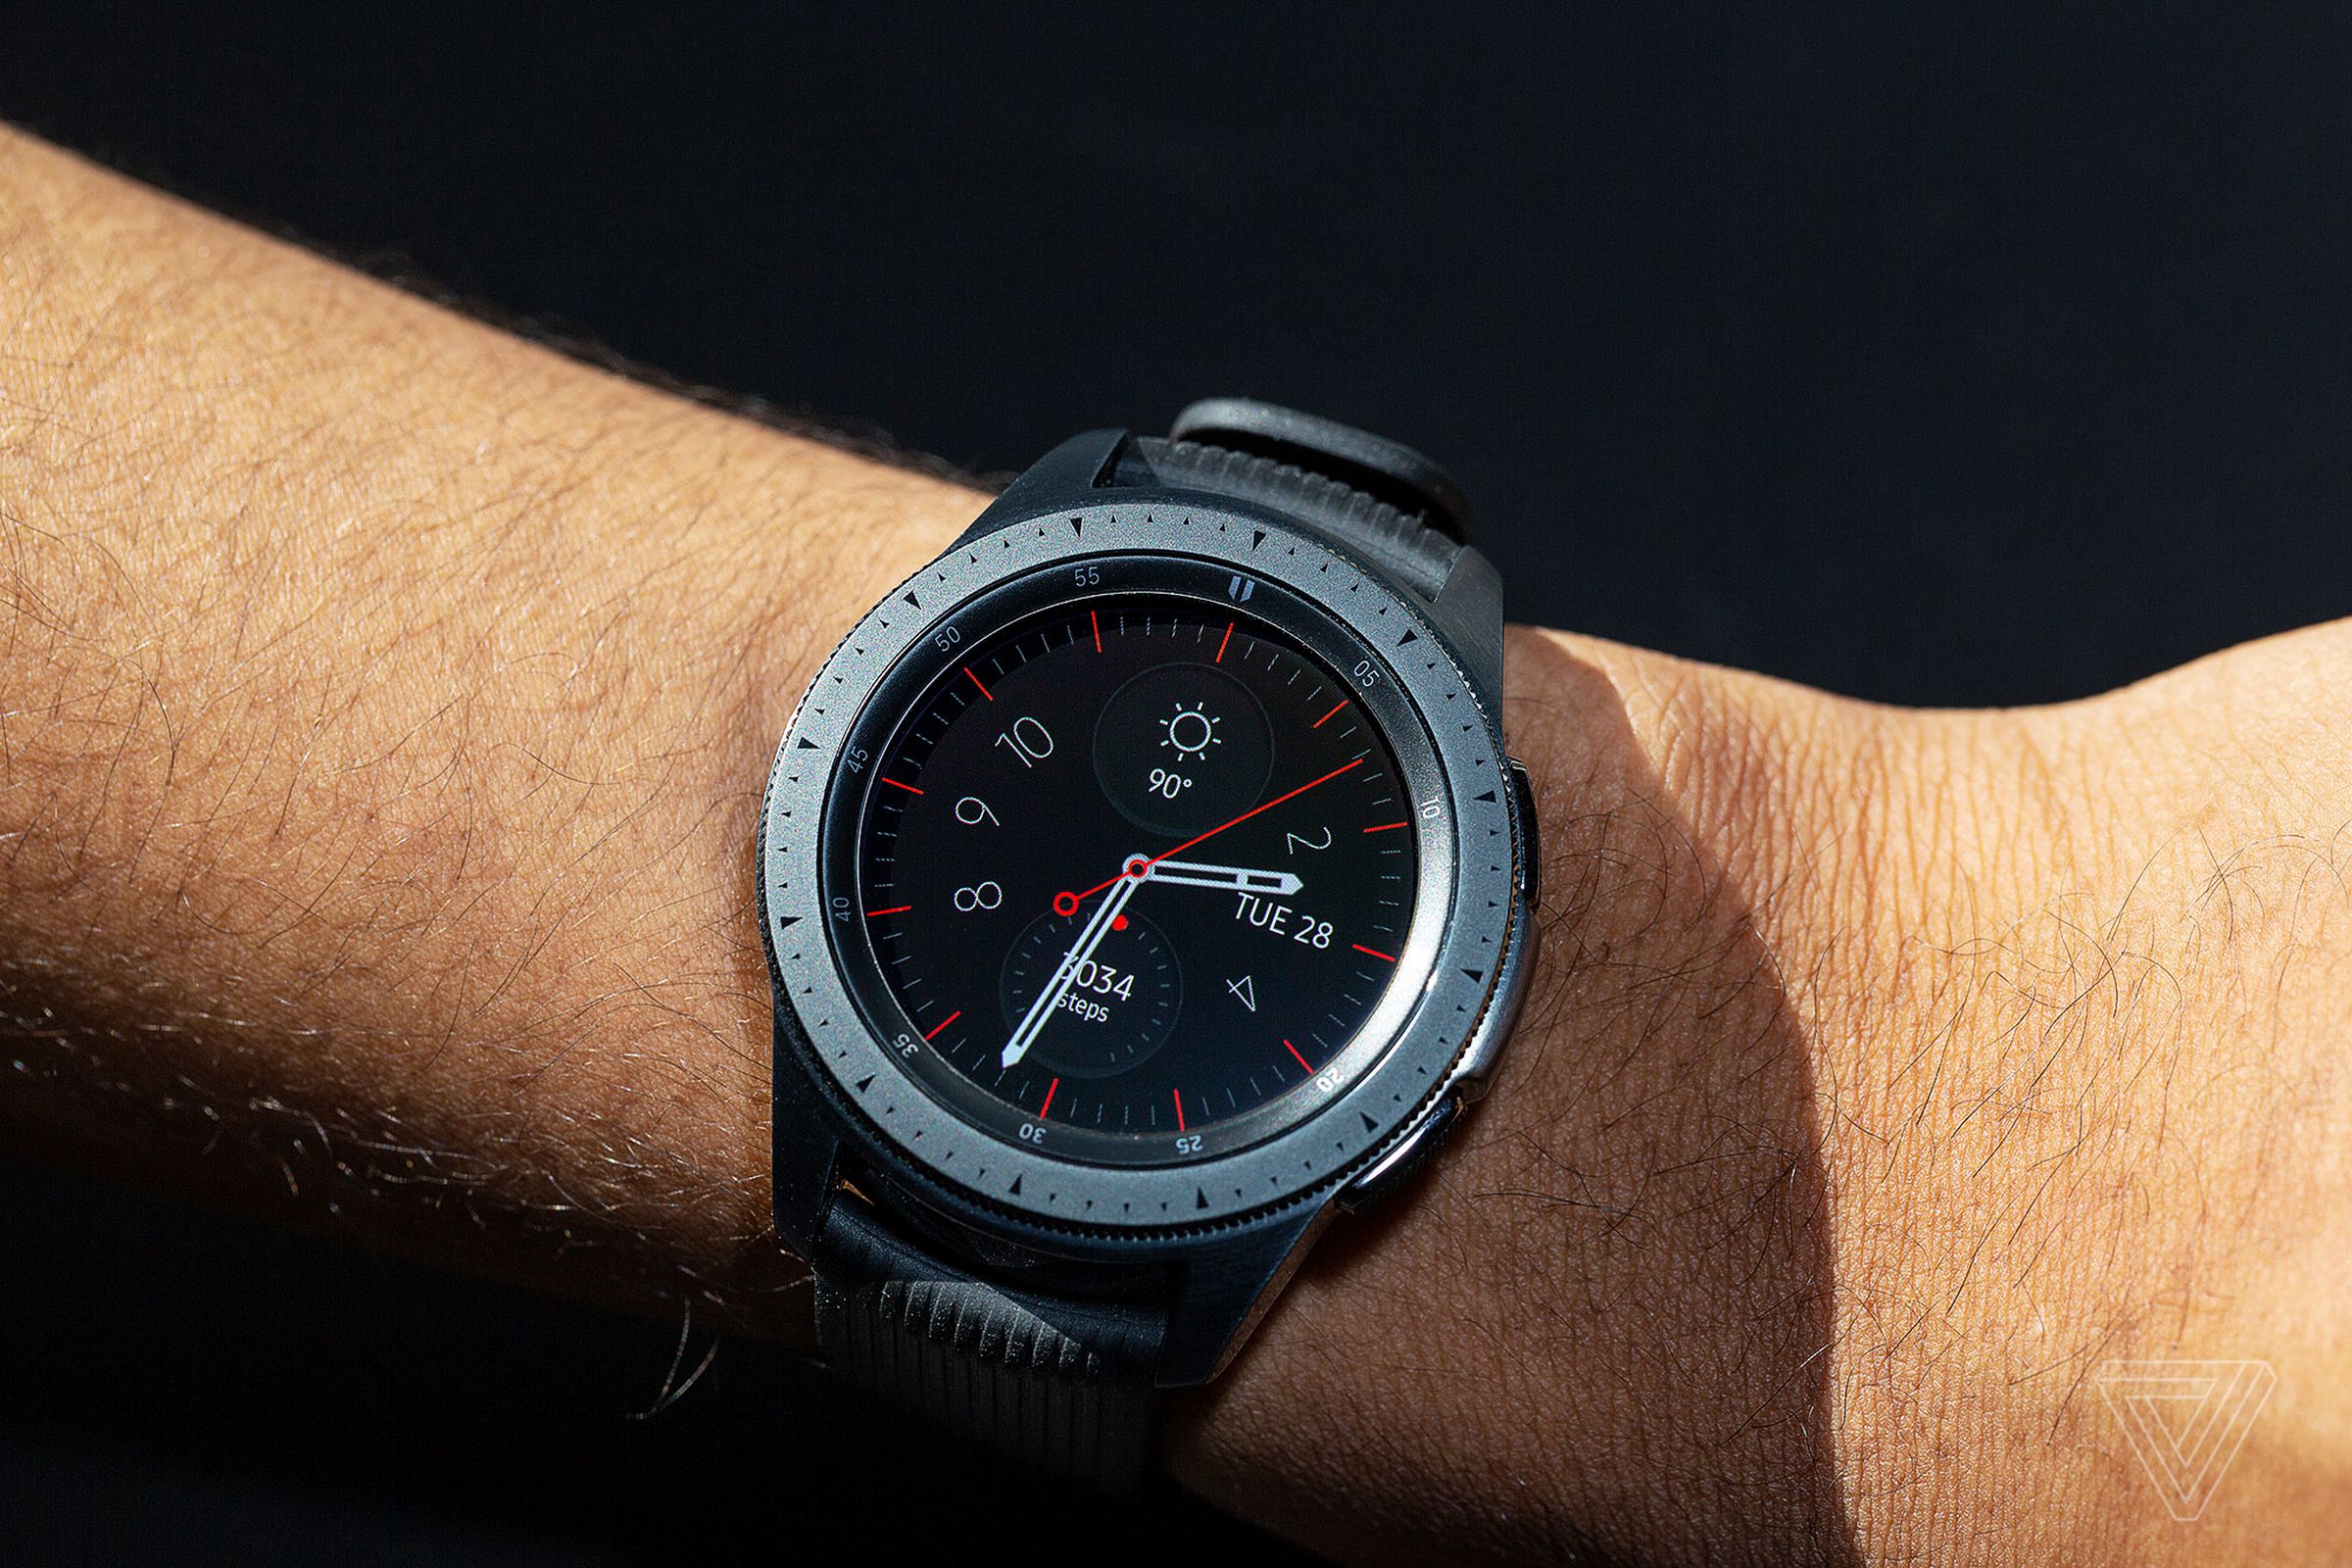 The Galaxy Watch 3 is expected to feature a similar rotating bezel to the original Galaxy watch (pictured).